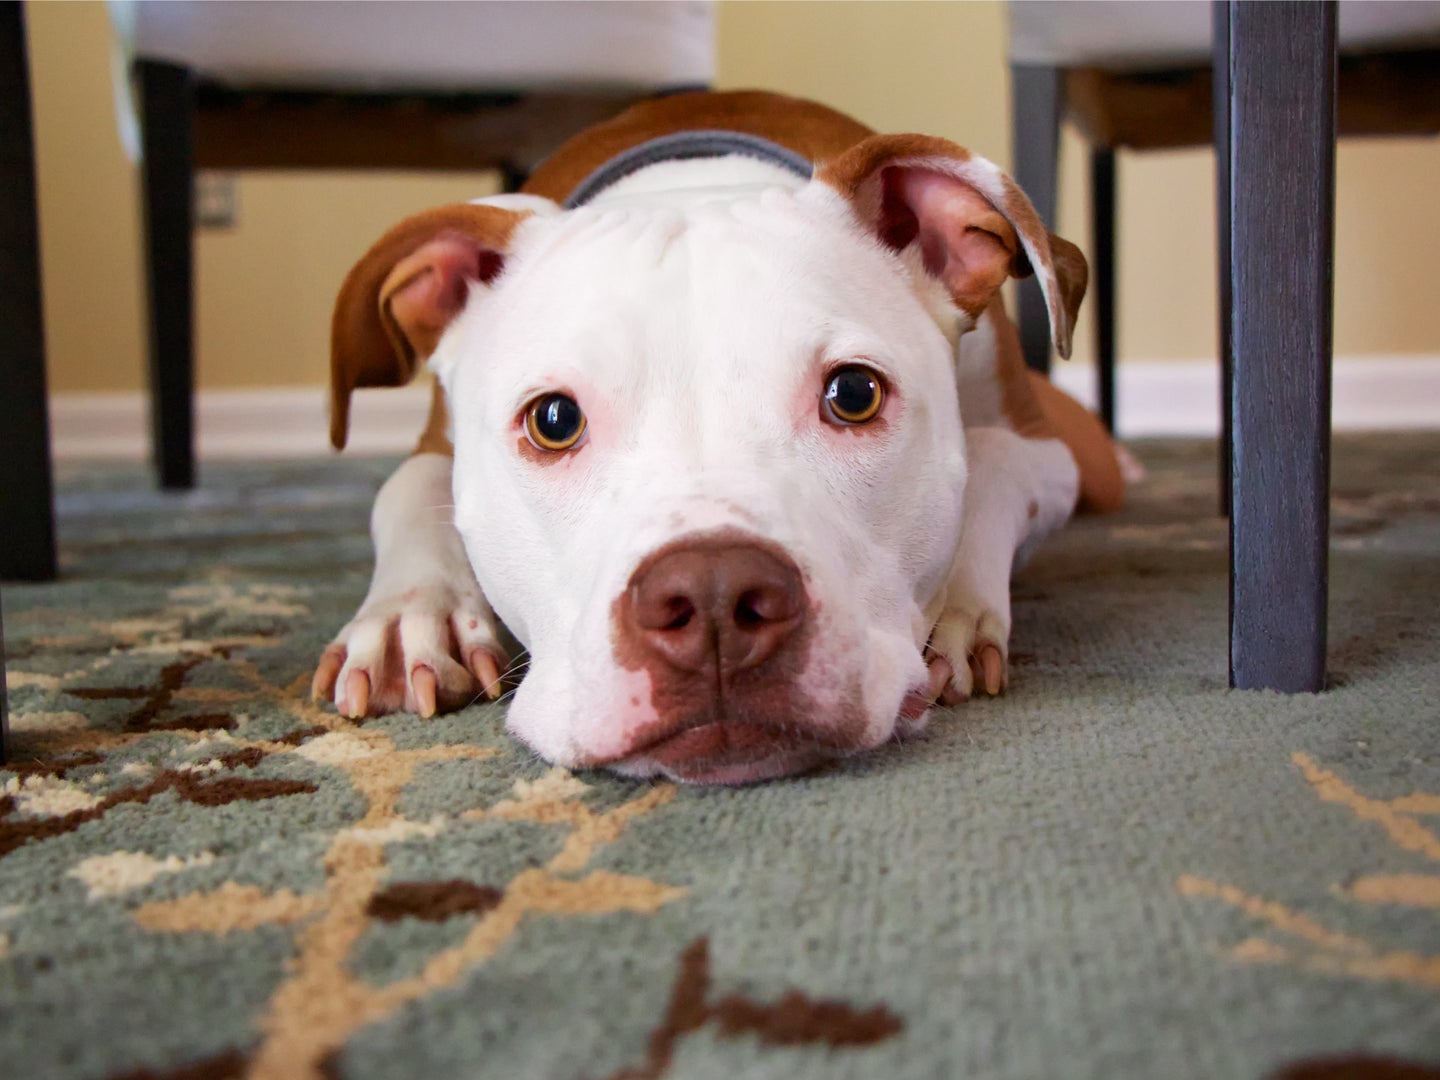 A brown-and-white dog laying on a blue-green carpet under a wooden table.